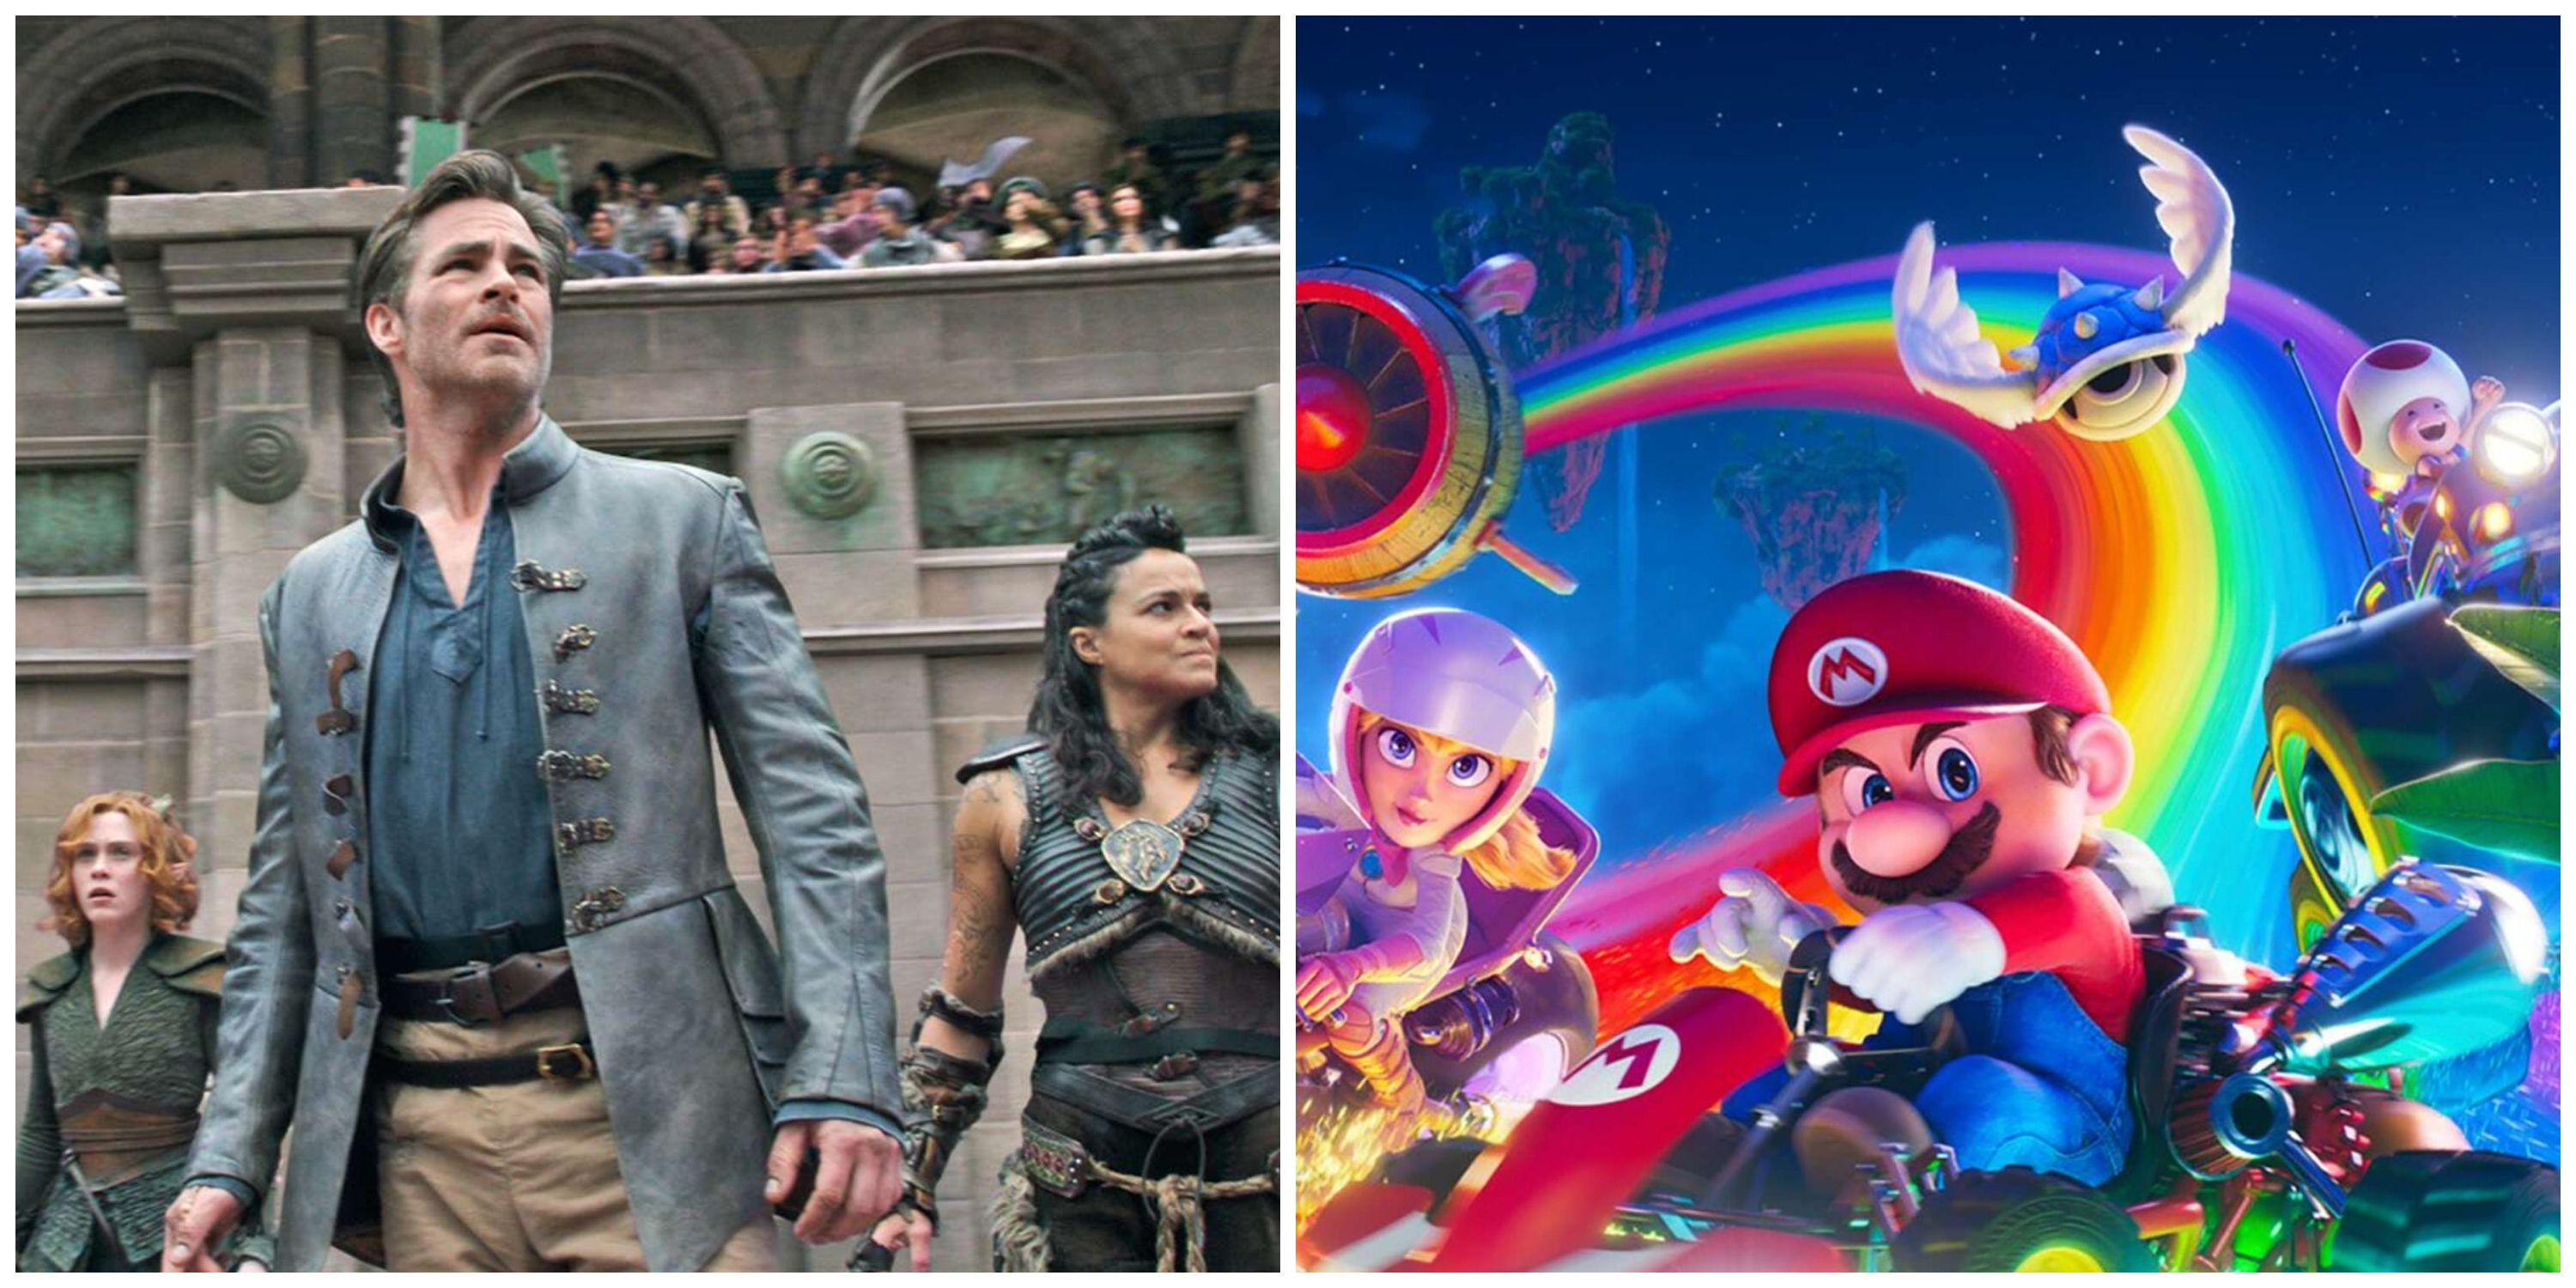 A split image featuring Sophia Lillis as Doric, Chris Pine as Edgin Darvis, and Michelle Rodriguez as Holga Kilgore from Dungeons & Dragons: Honor Among Thieves, and Peach, Mario, and Toad from The SUper Mario Bros. Movie